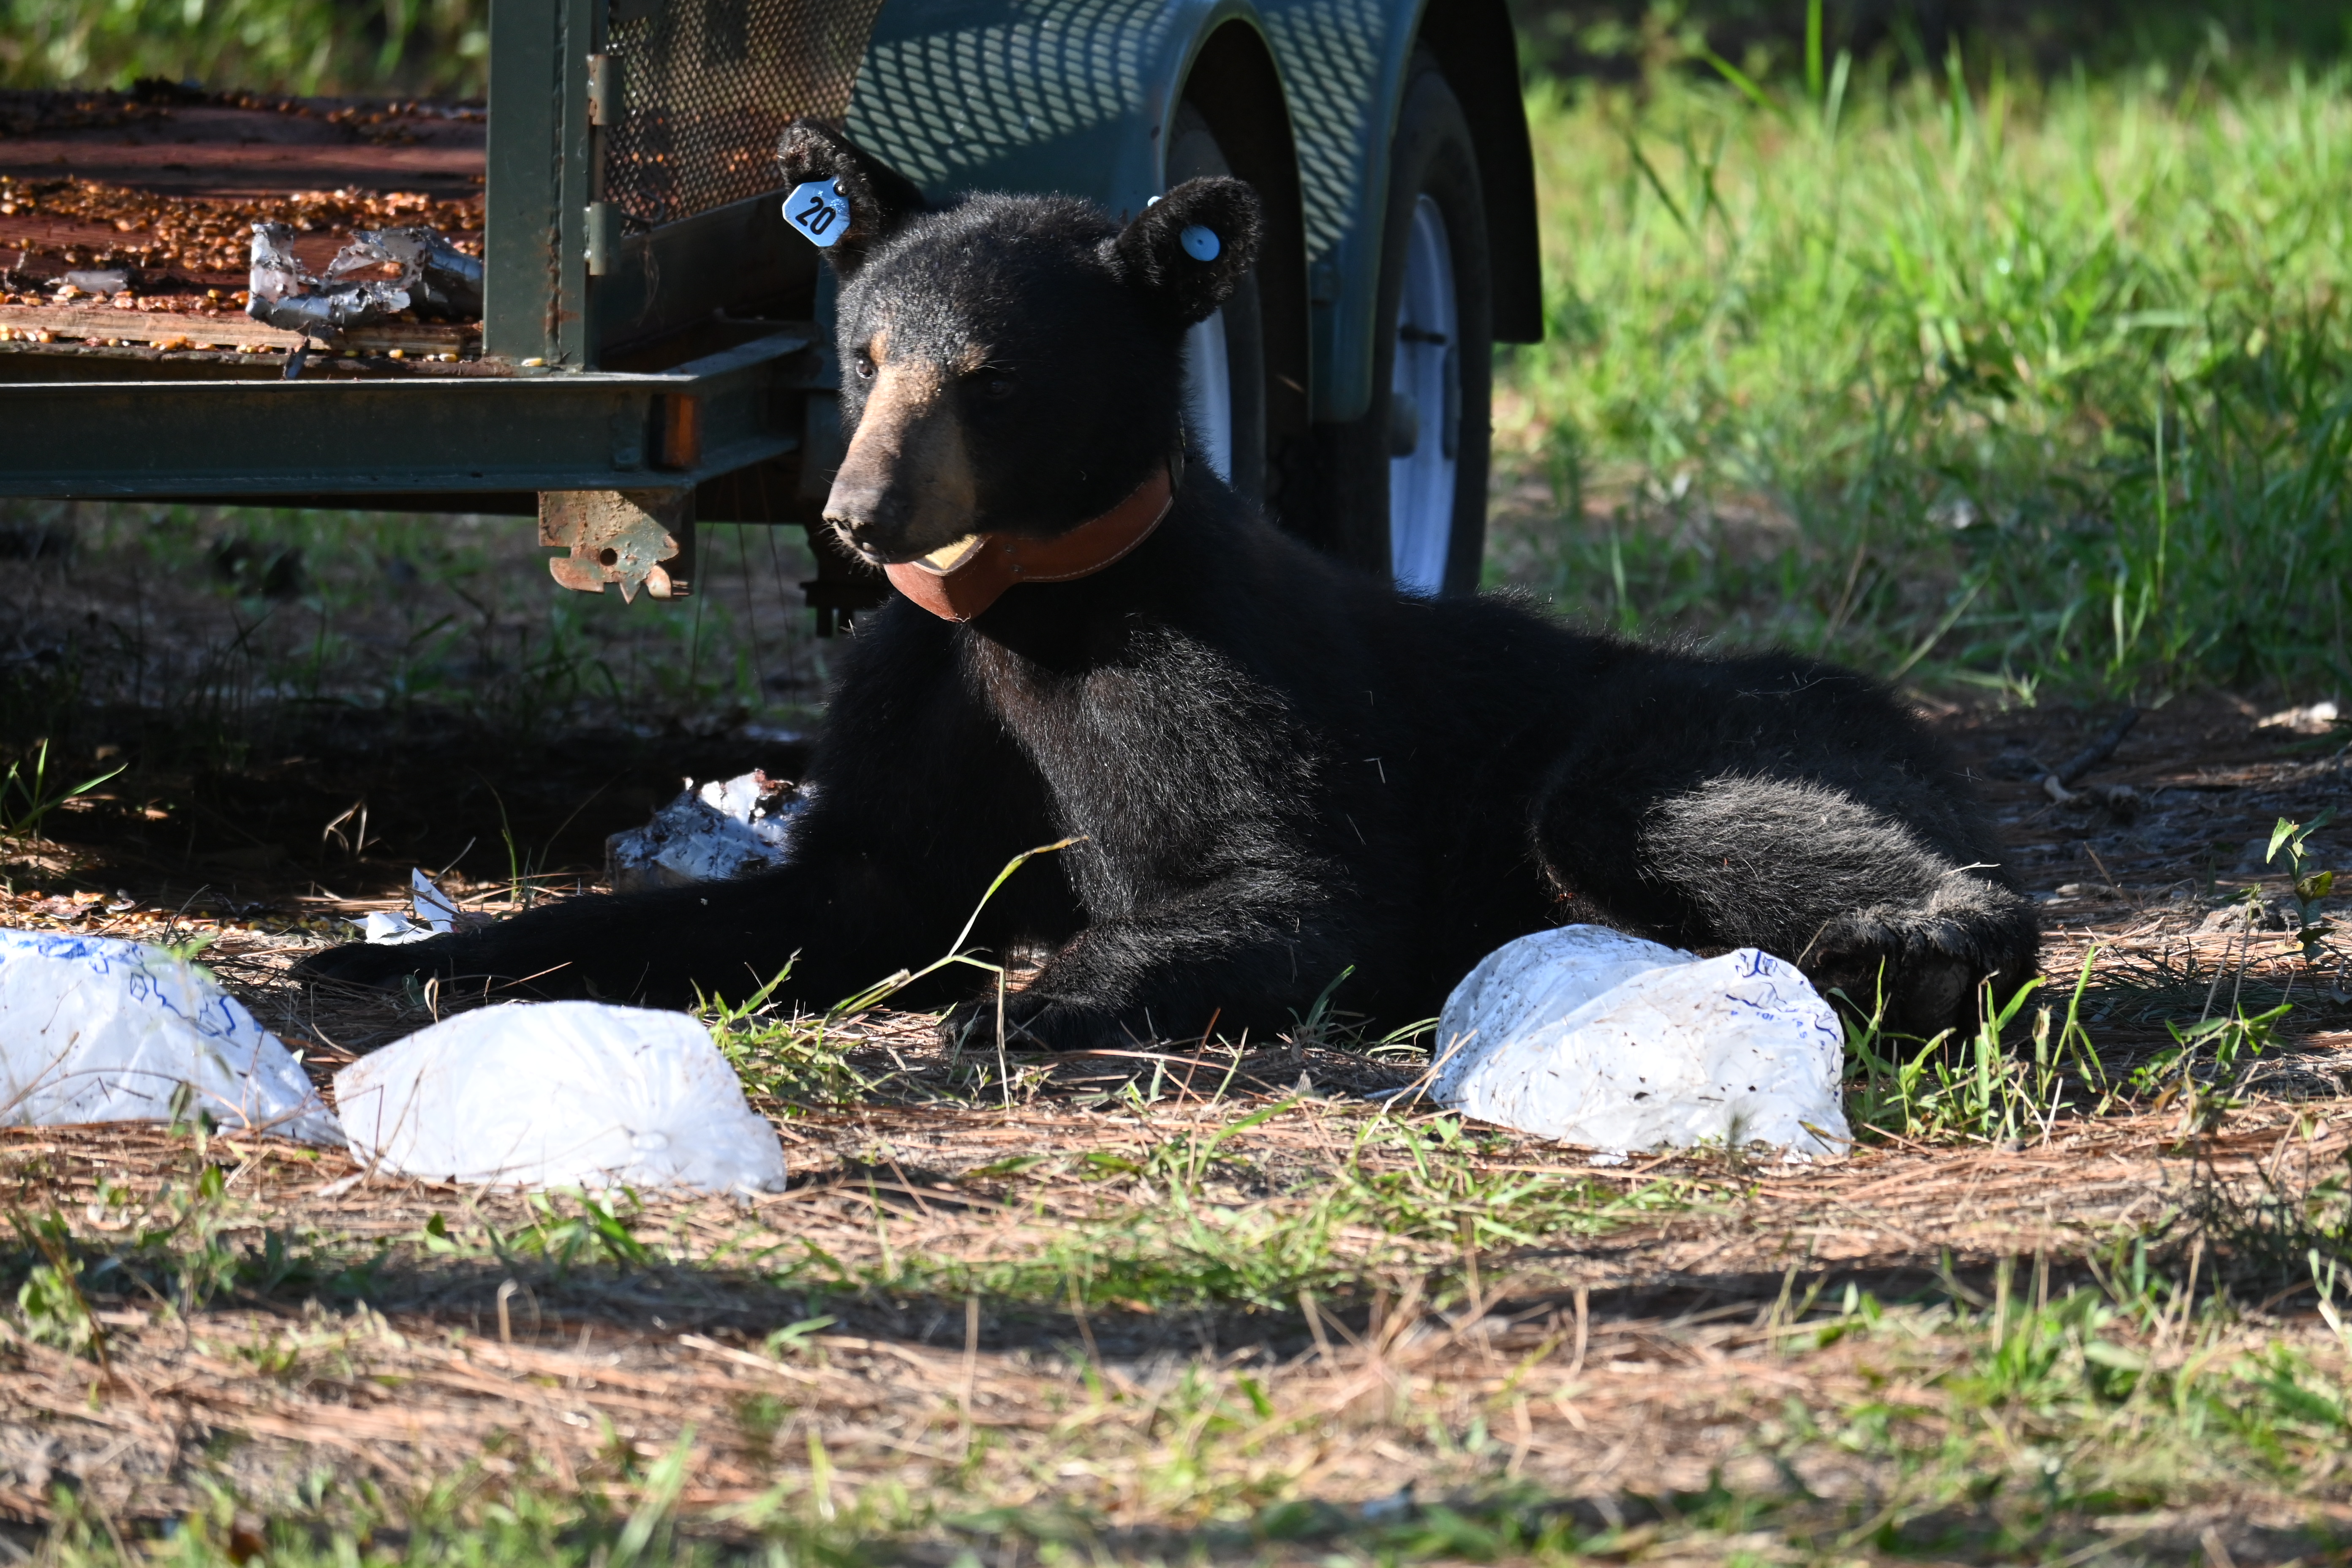 How researchers are helping to save and grow the black bear